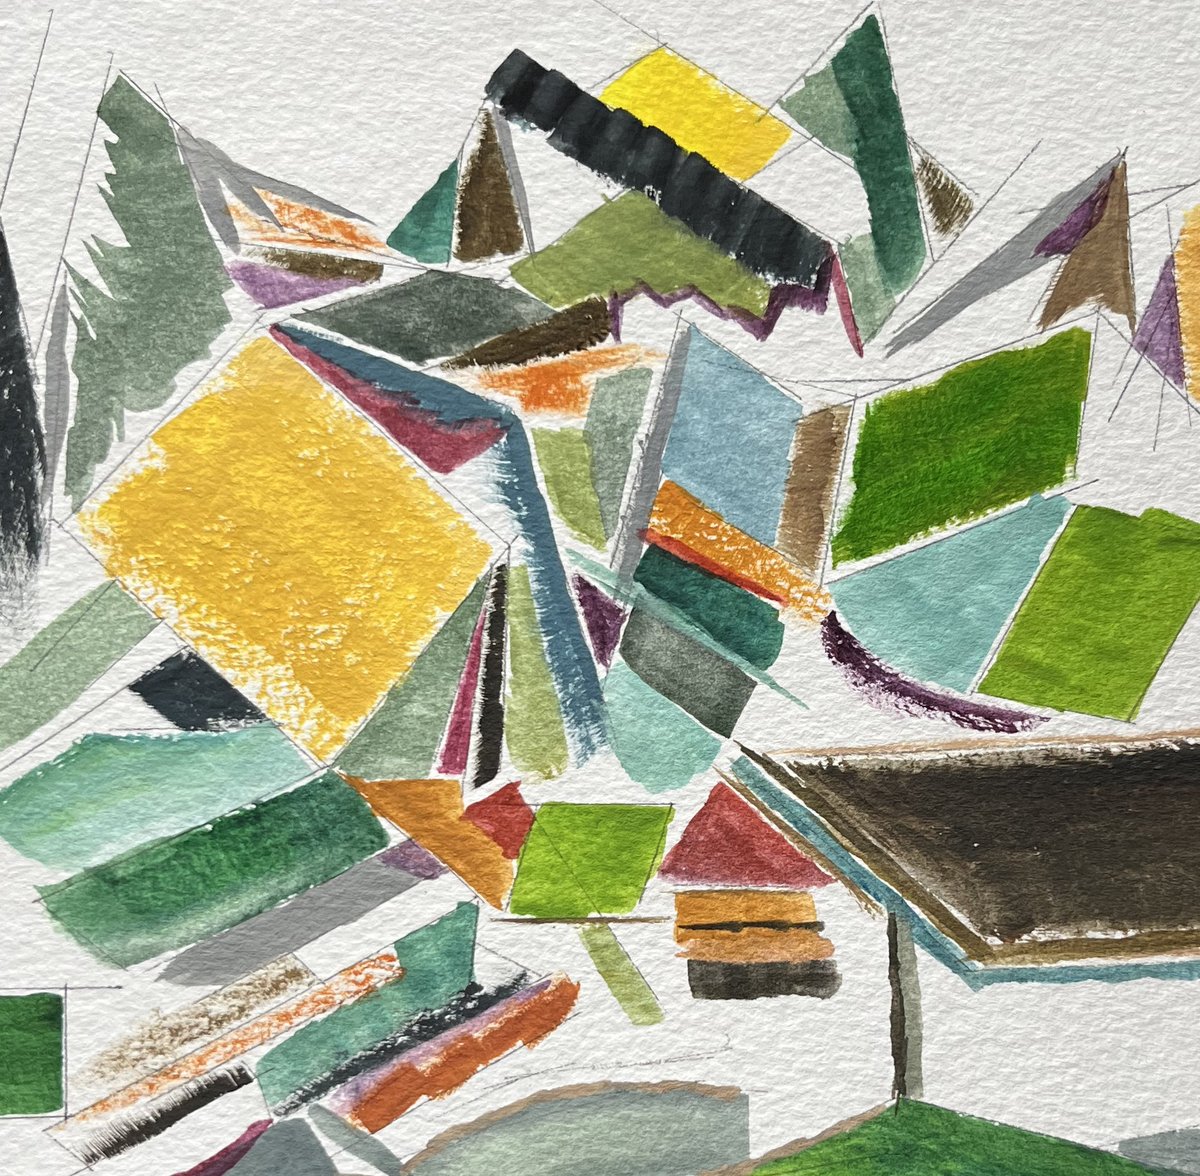 Finally back to some watercolors. It's been a while. Mountains of Volumes. #artwork #watercolor Certainly thankful for #books and #writing ! Additional pieces: anthonystgeorge.com/artwork